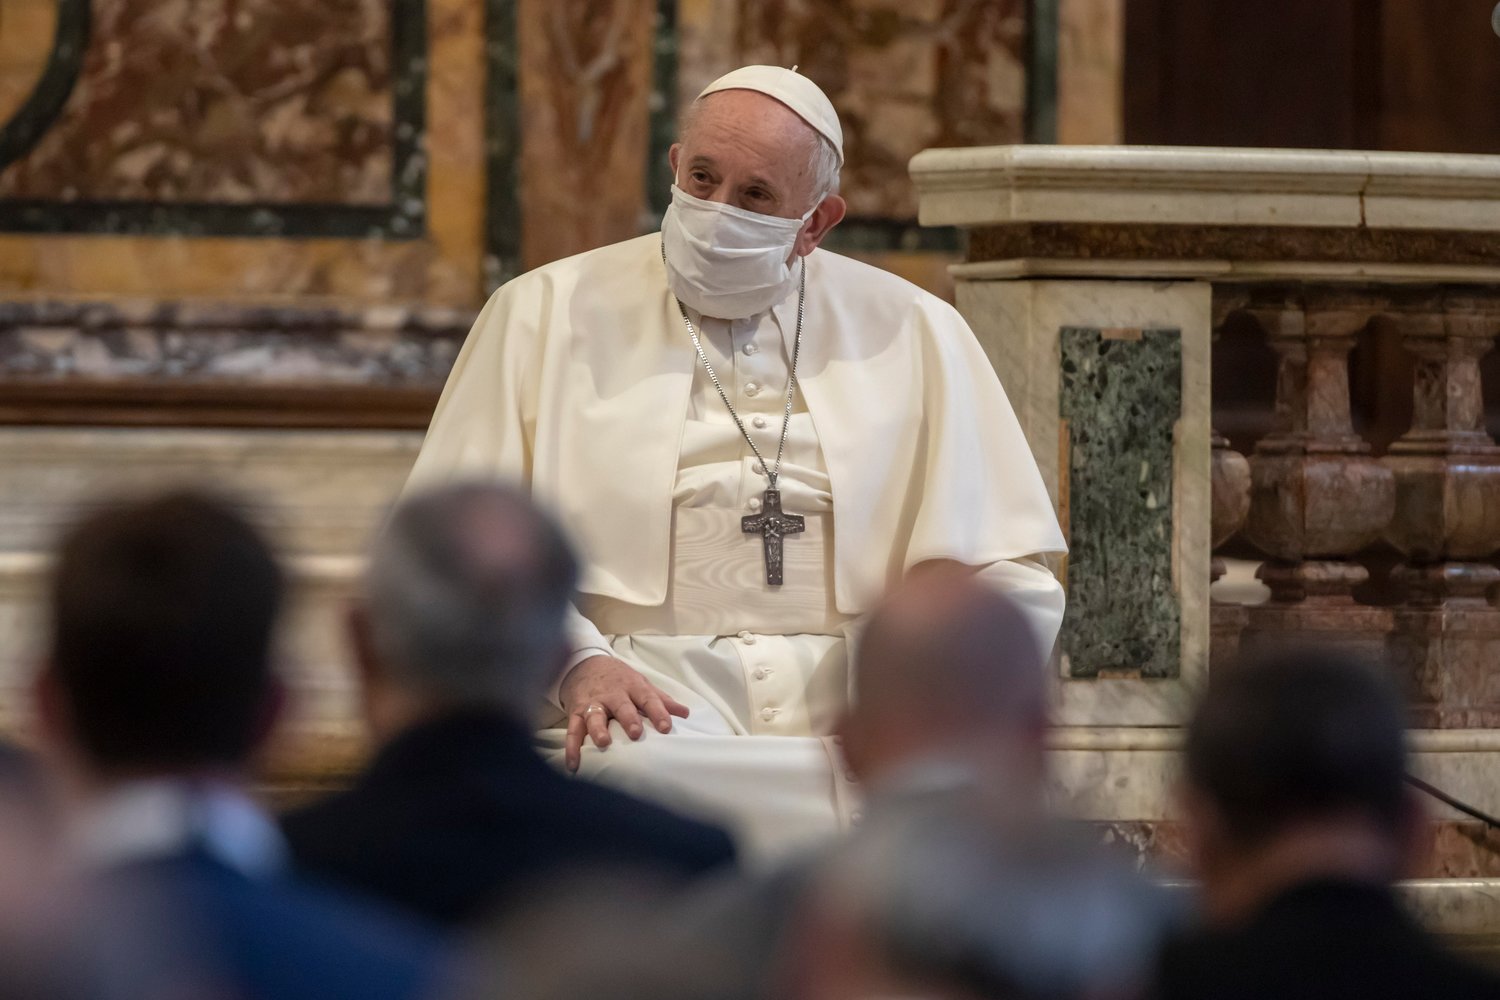 Pope Francis prays for peace with other religious leaders at the Basilica of Santa Maria in Ara Coeli in Rome Oct. 20, 2020.  In a new documentary, Pope Francis expressed openness to the idea of laws recognizing civil unions, including for gay couples, to protect their rights.